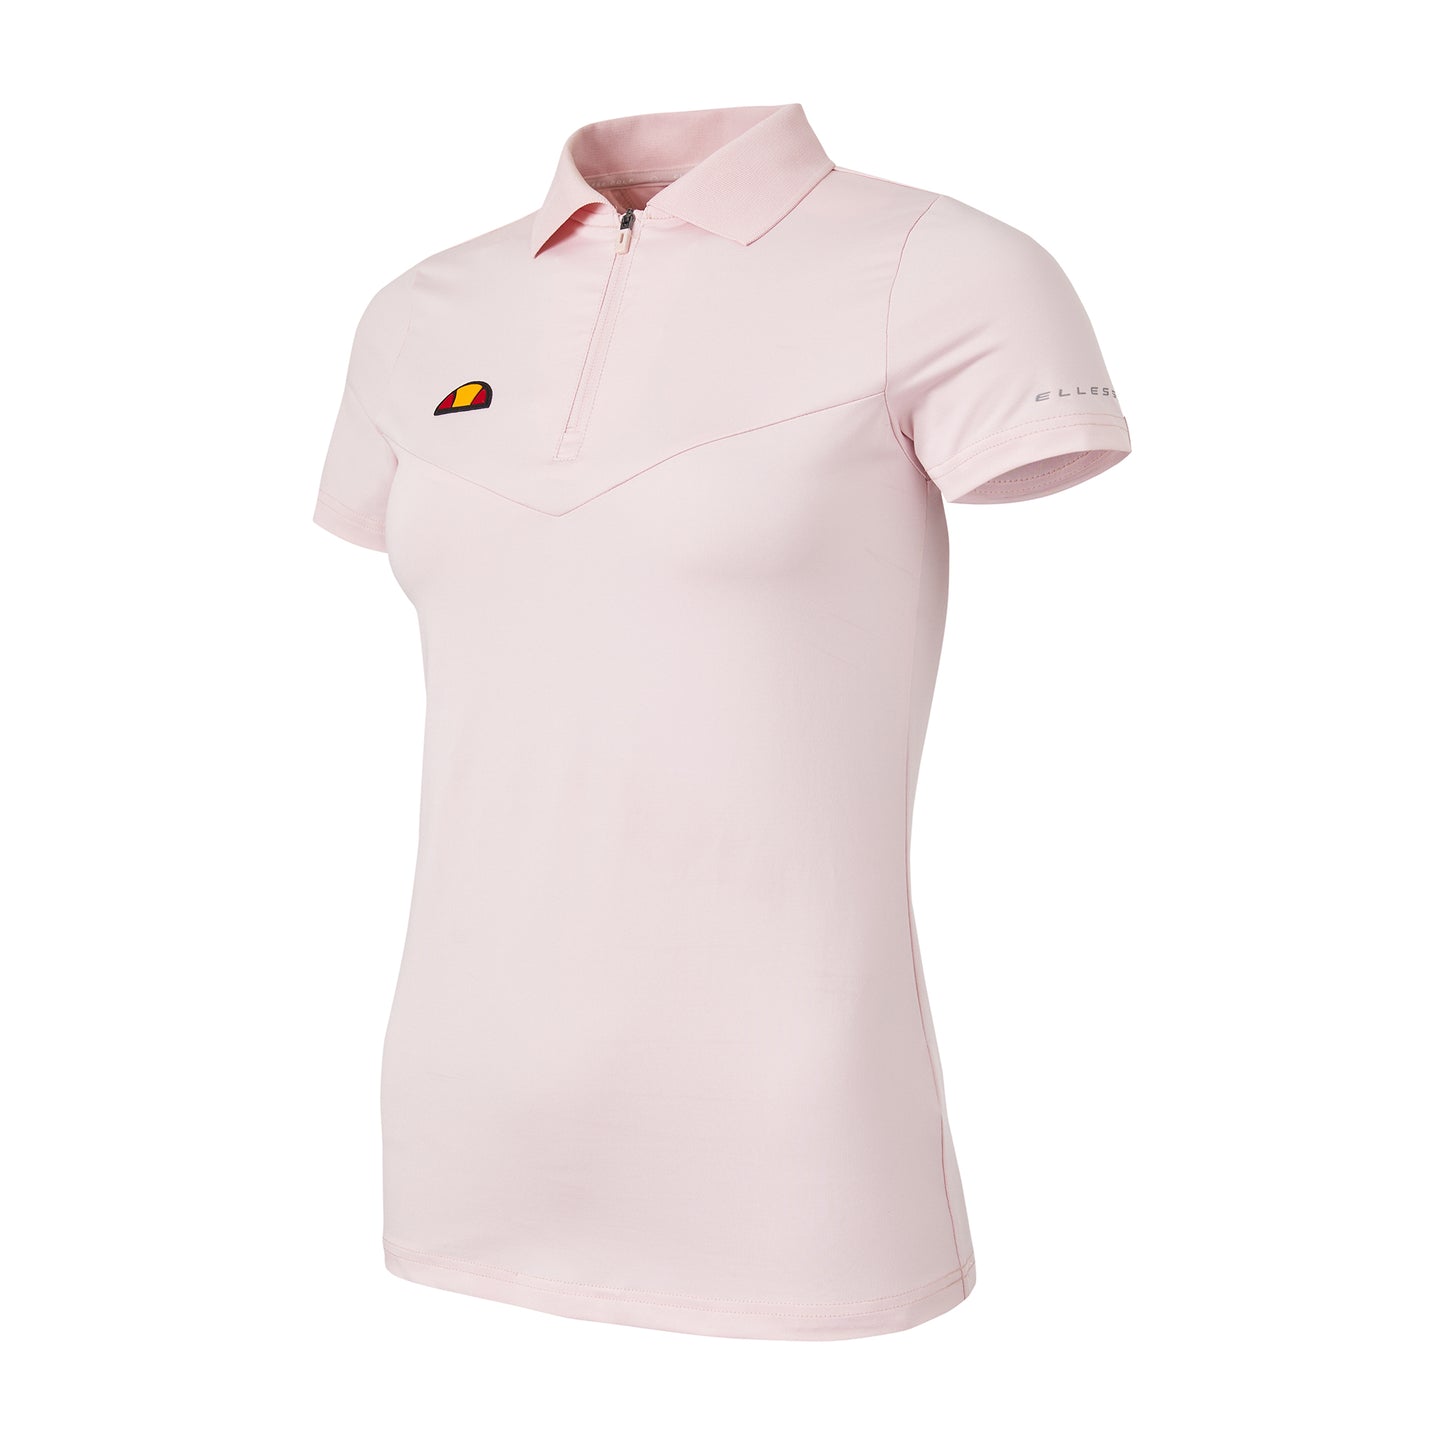 Ellesse Women's Short Sleeve Polo in Light Pink with Zip-Neck